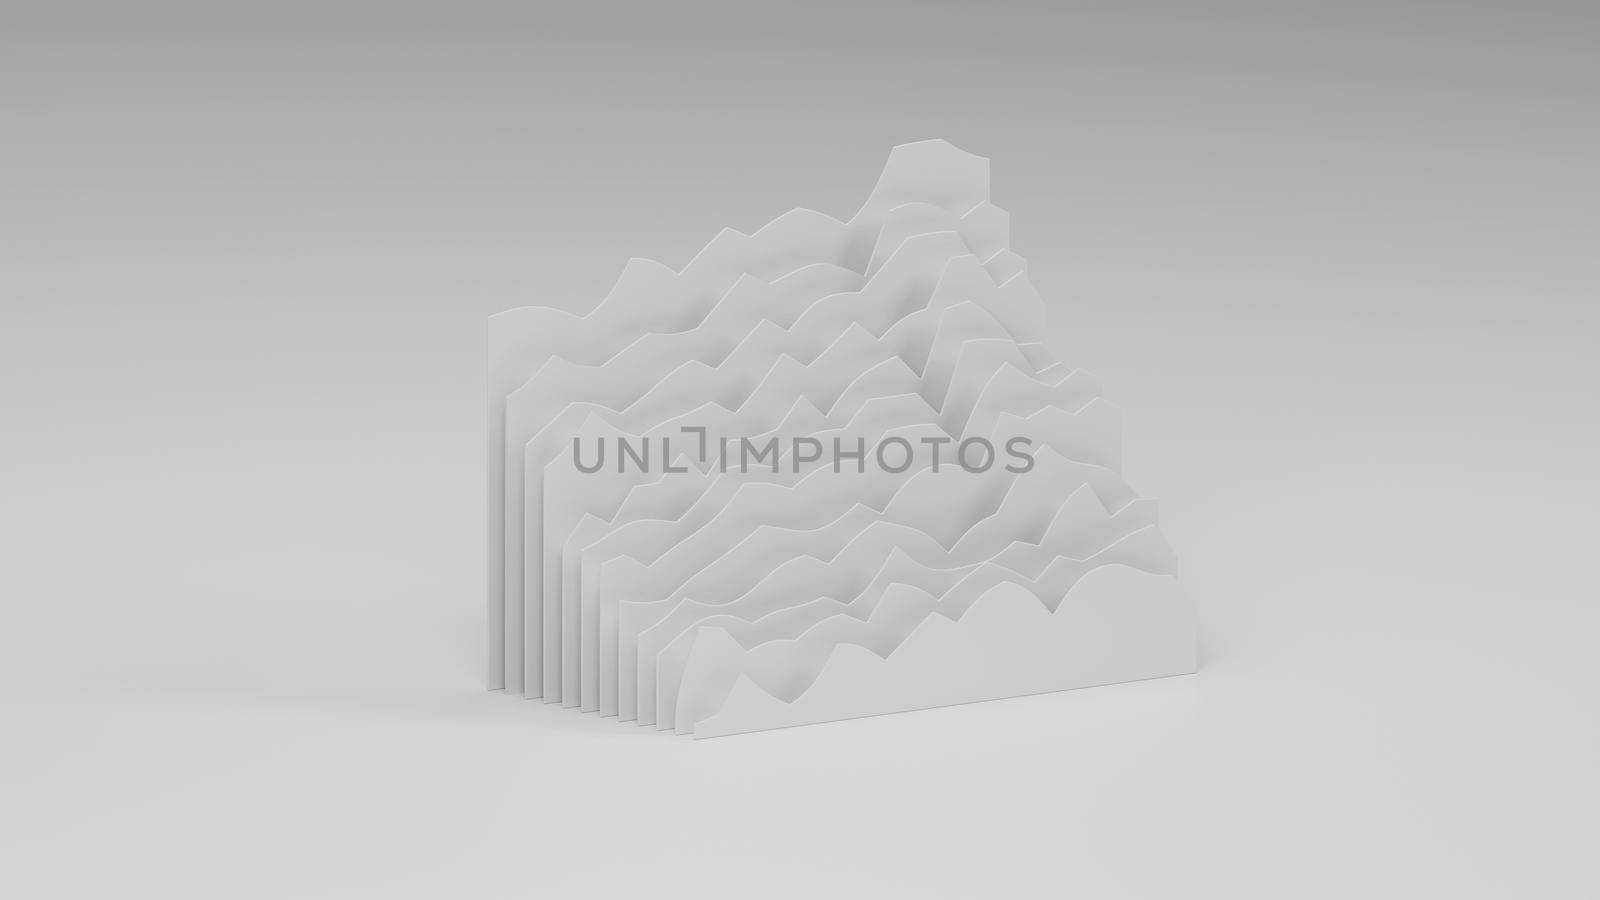 A Set of white charts 3D illustration by raferto1973